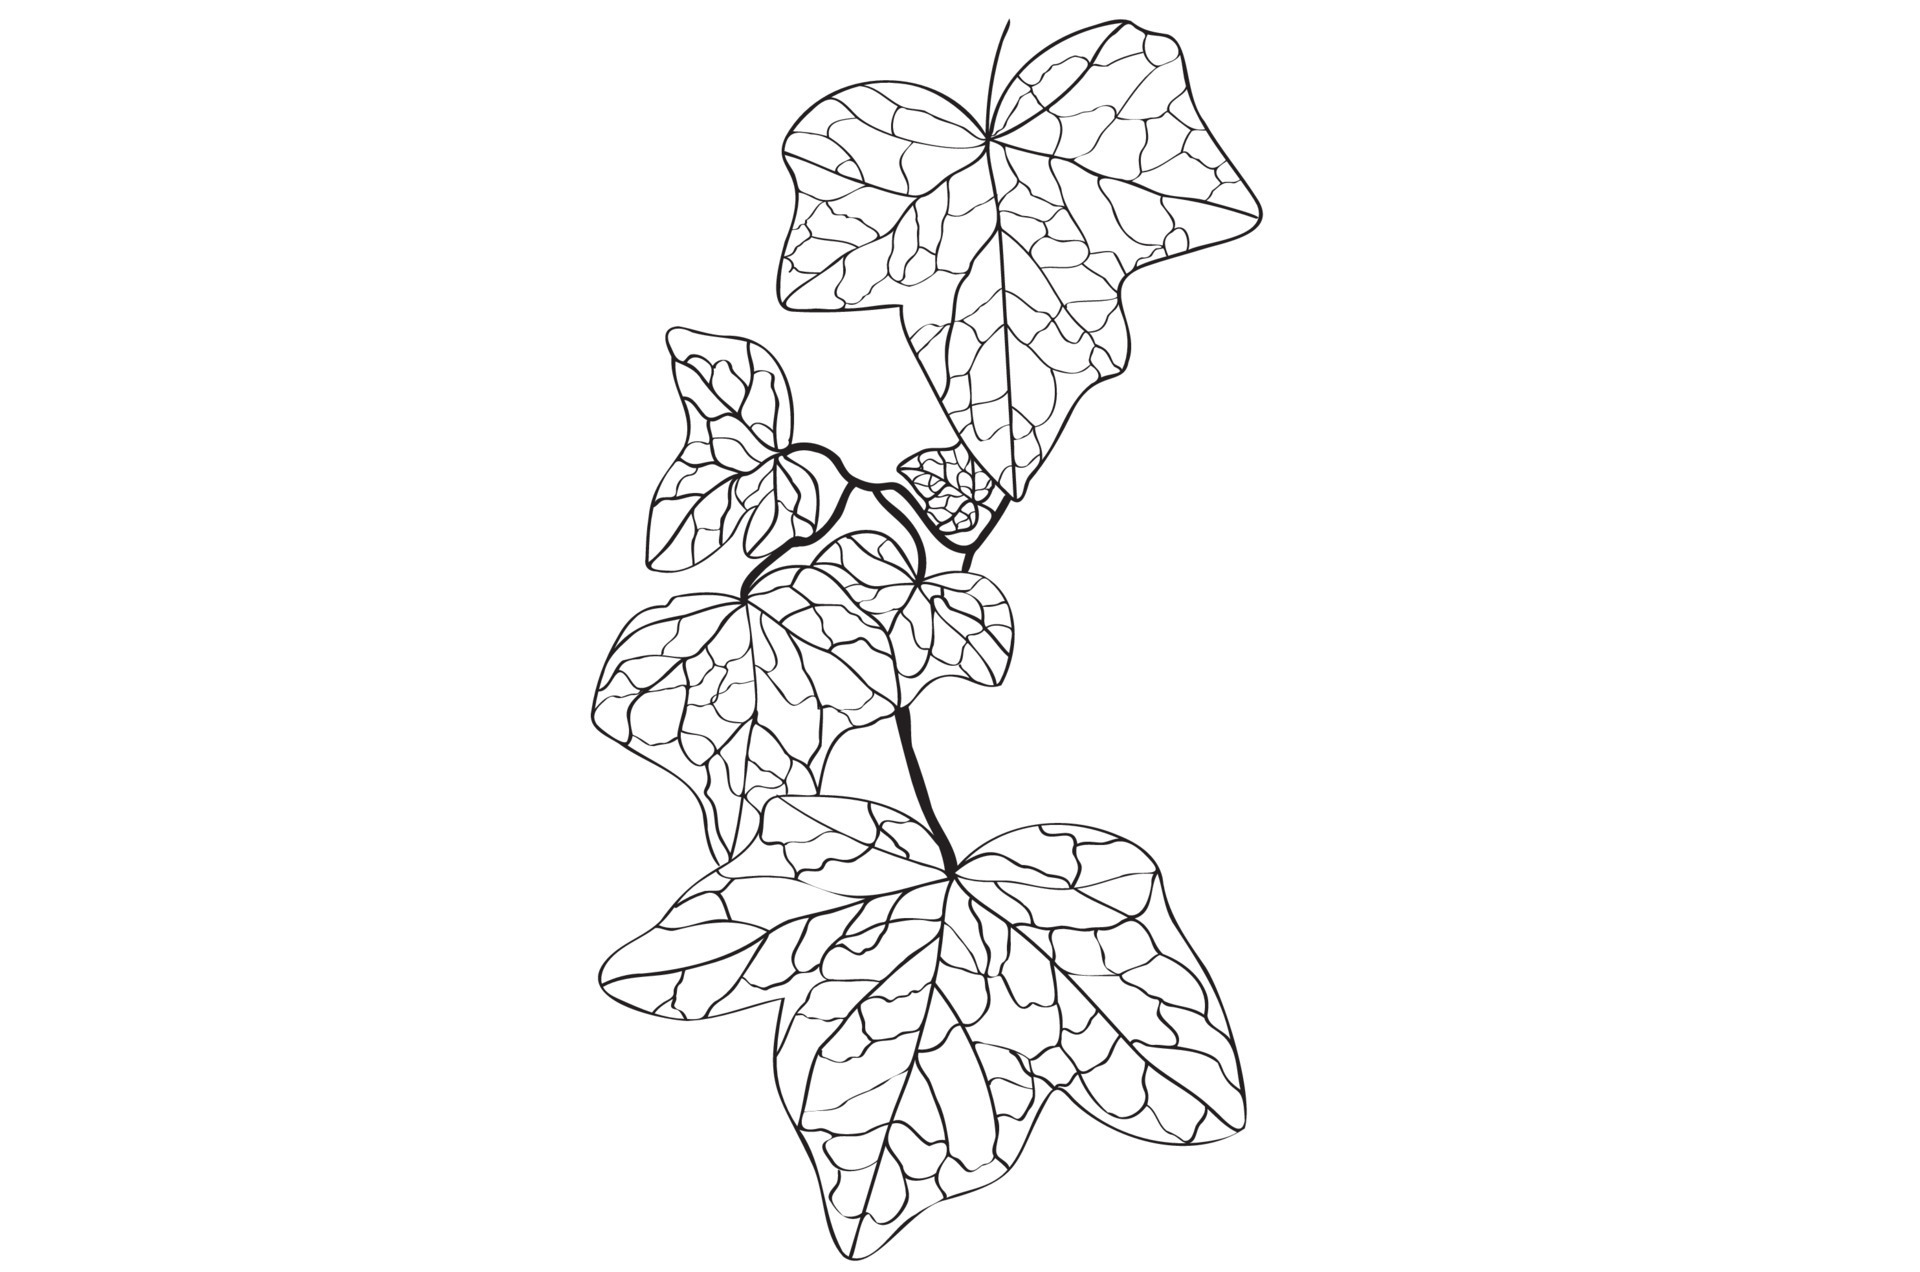 Ivy, hedera climbing, decoratively painted in black and white can ...